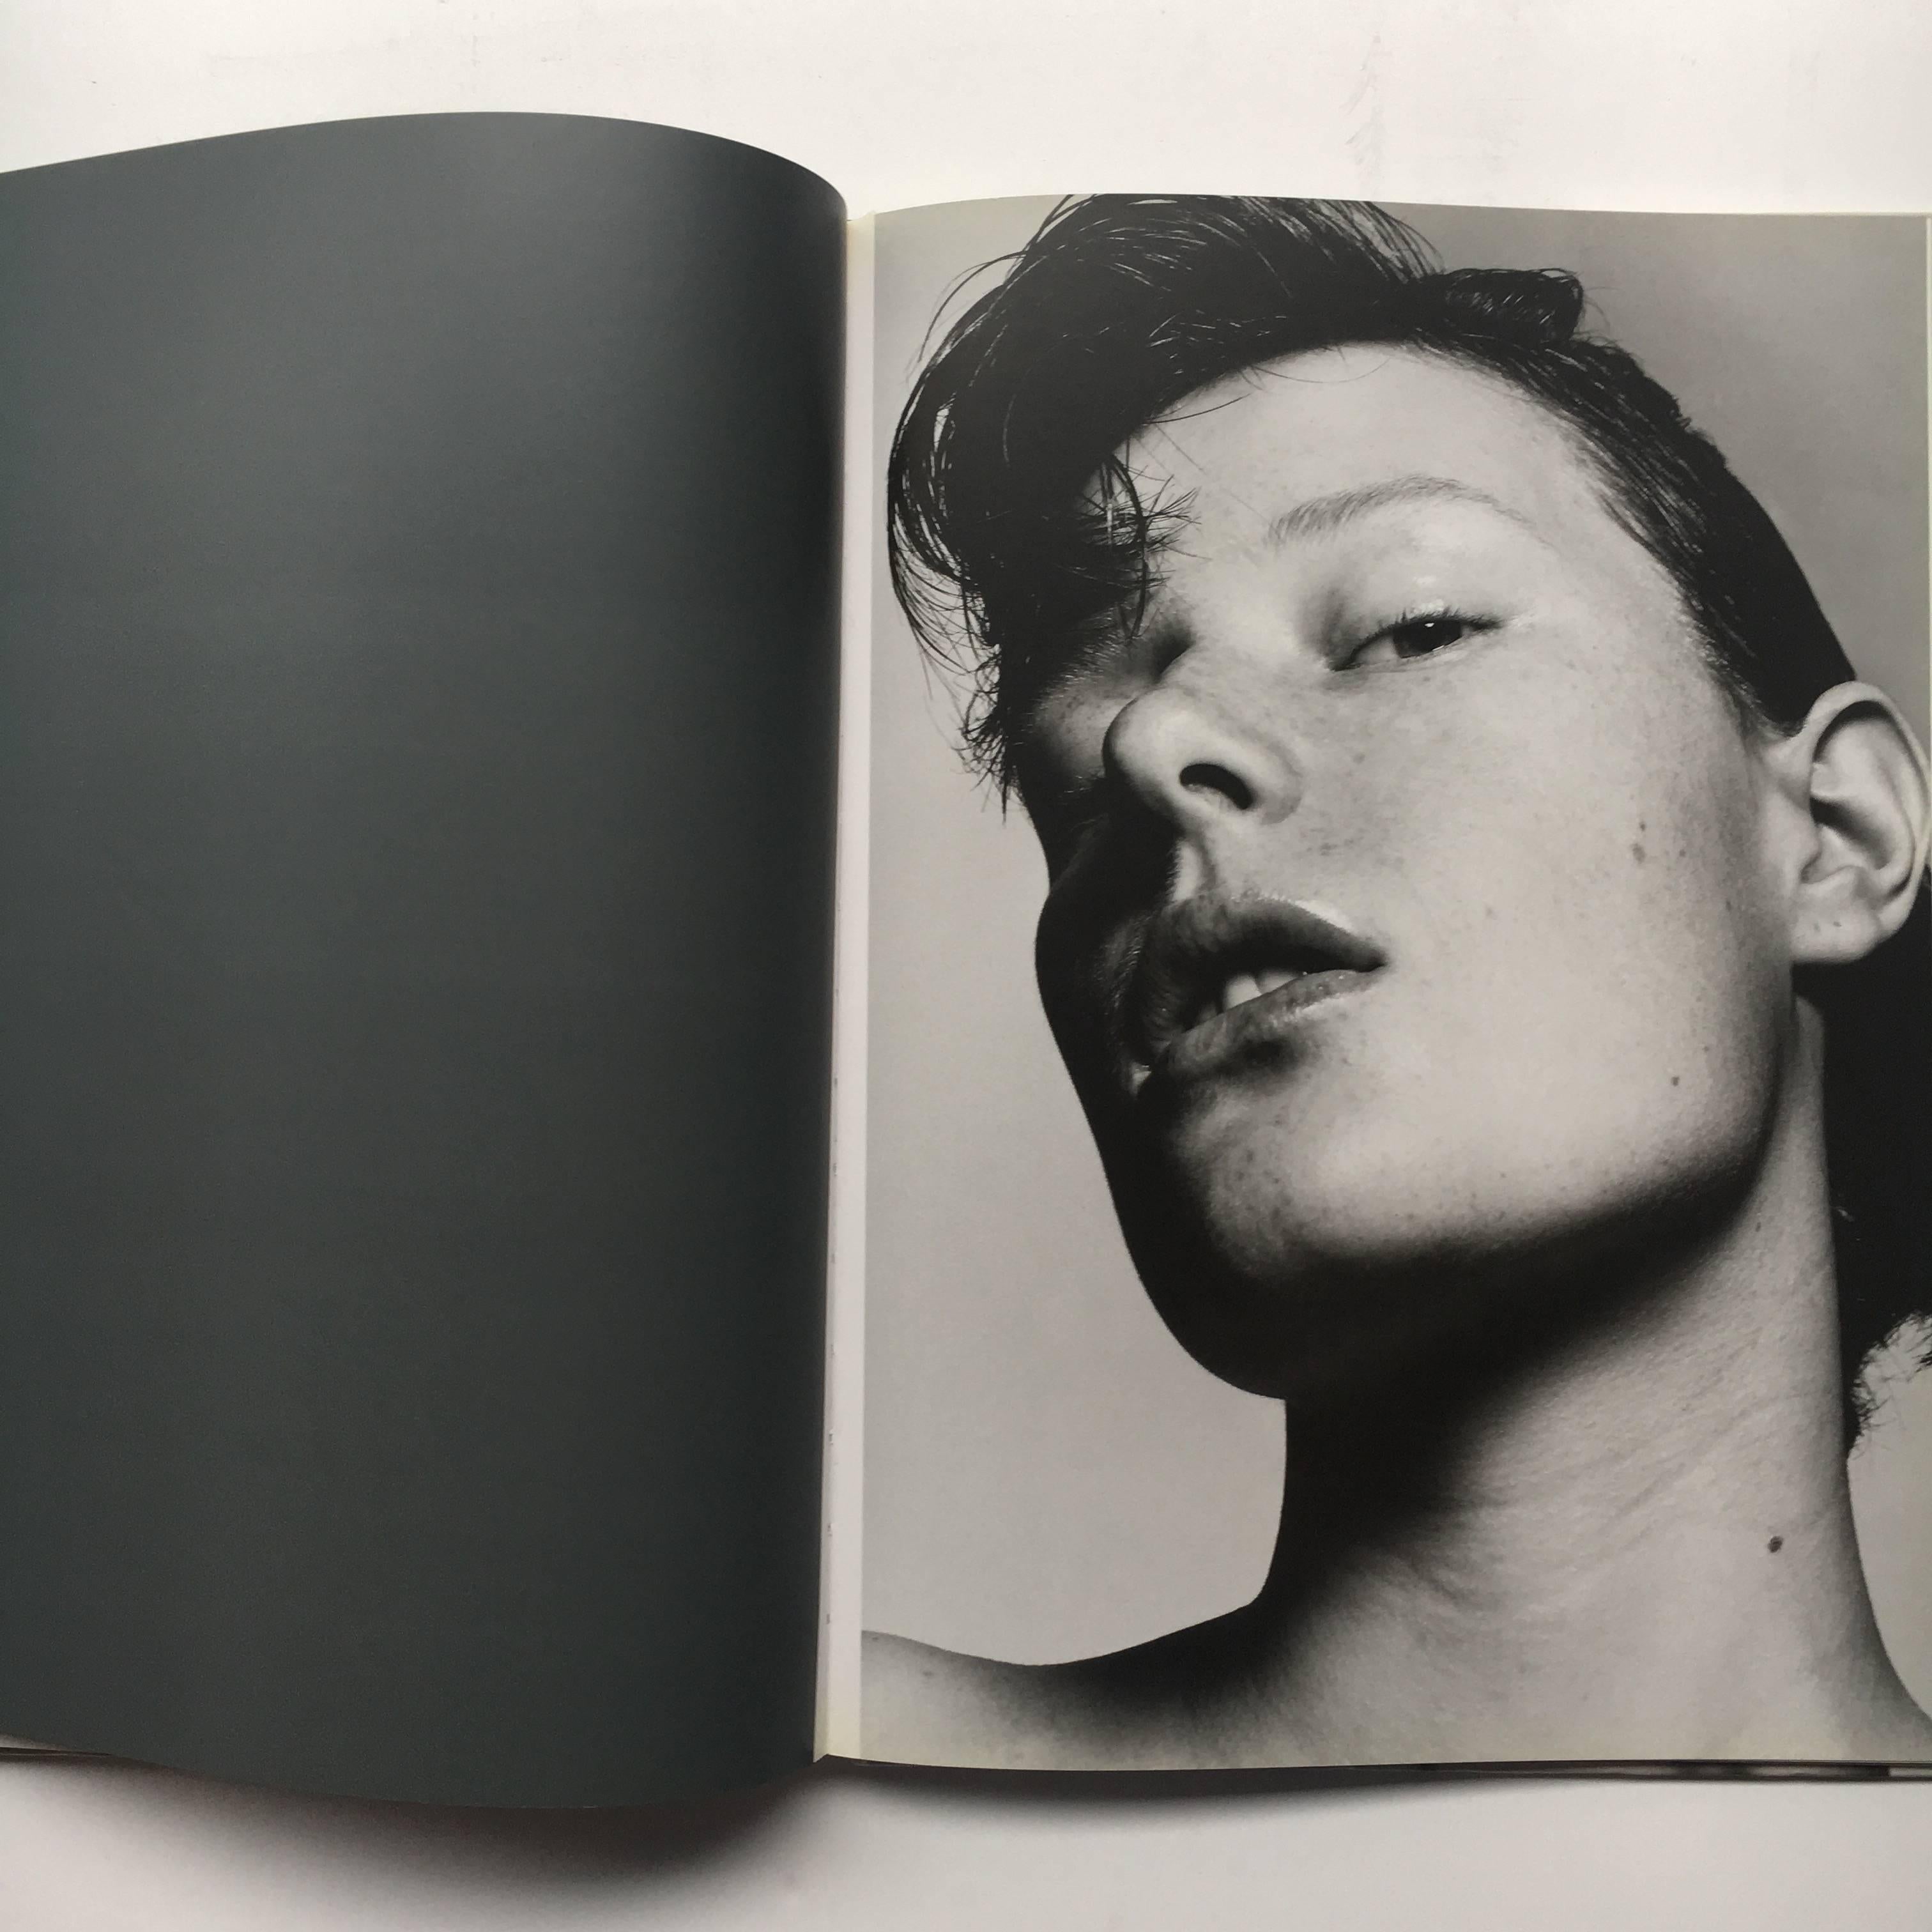 First edition, published by Dazed Books, 2002.

A very subtle and personal collection of black and white nudes created by Rankin. These photographs explore the theme of sexual ambiguity and androgyny, challenging the traditional views of